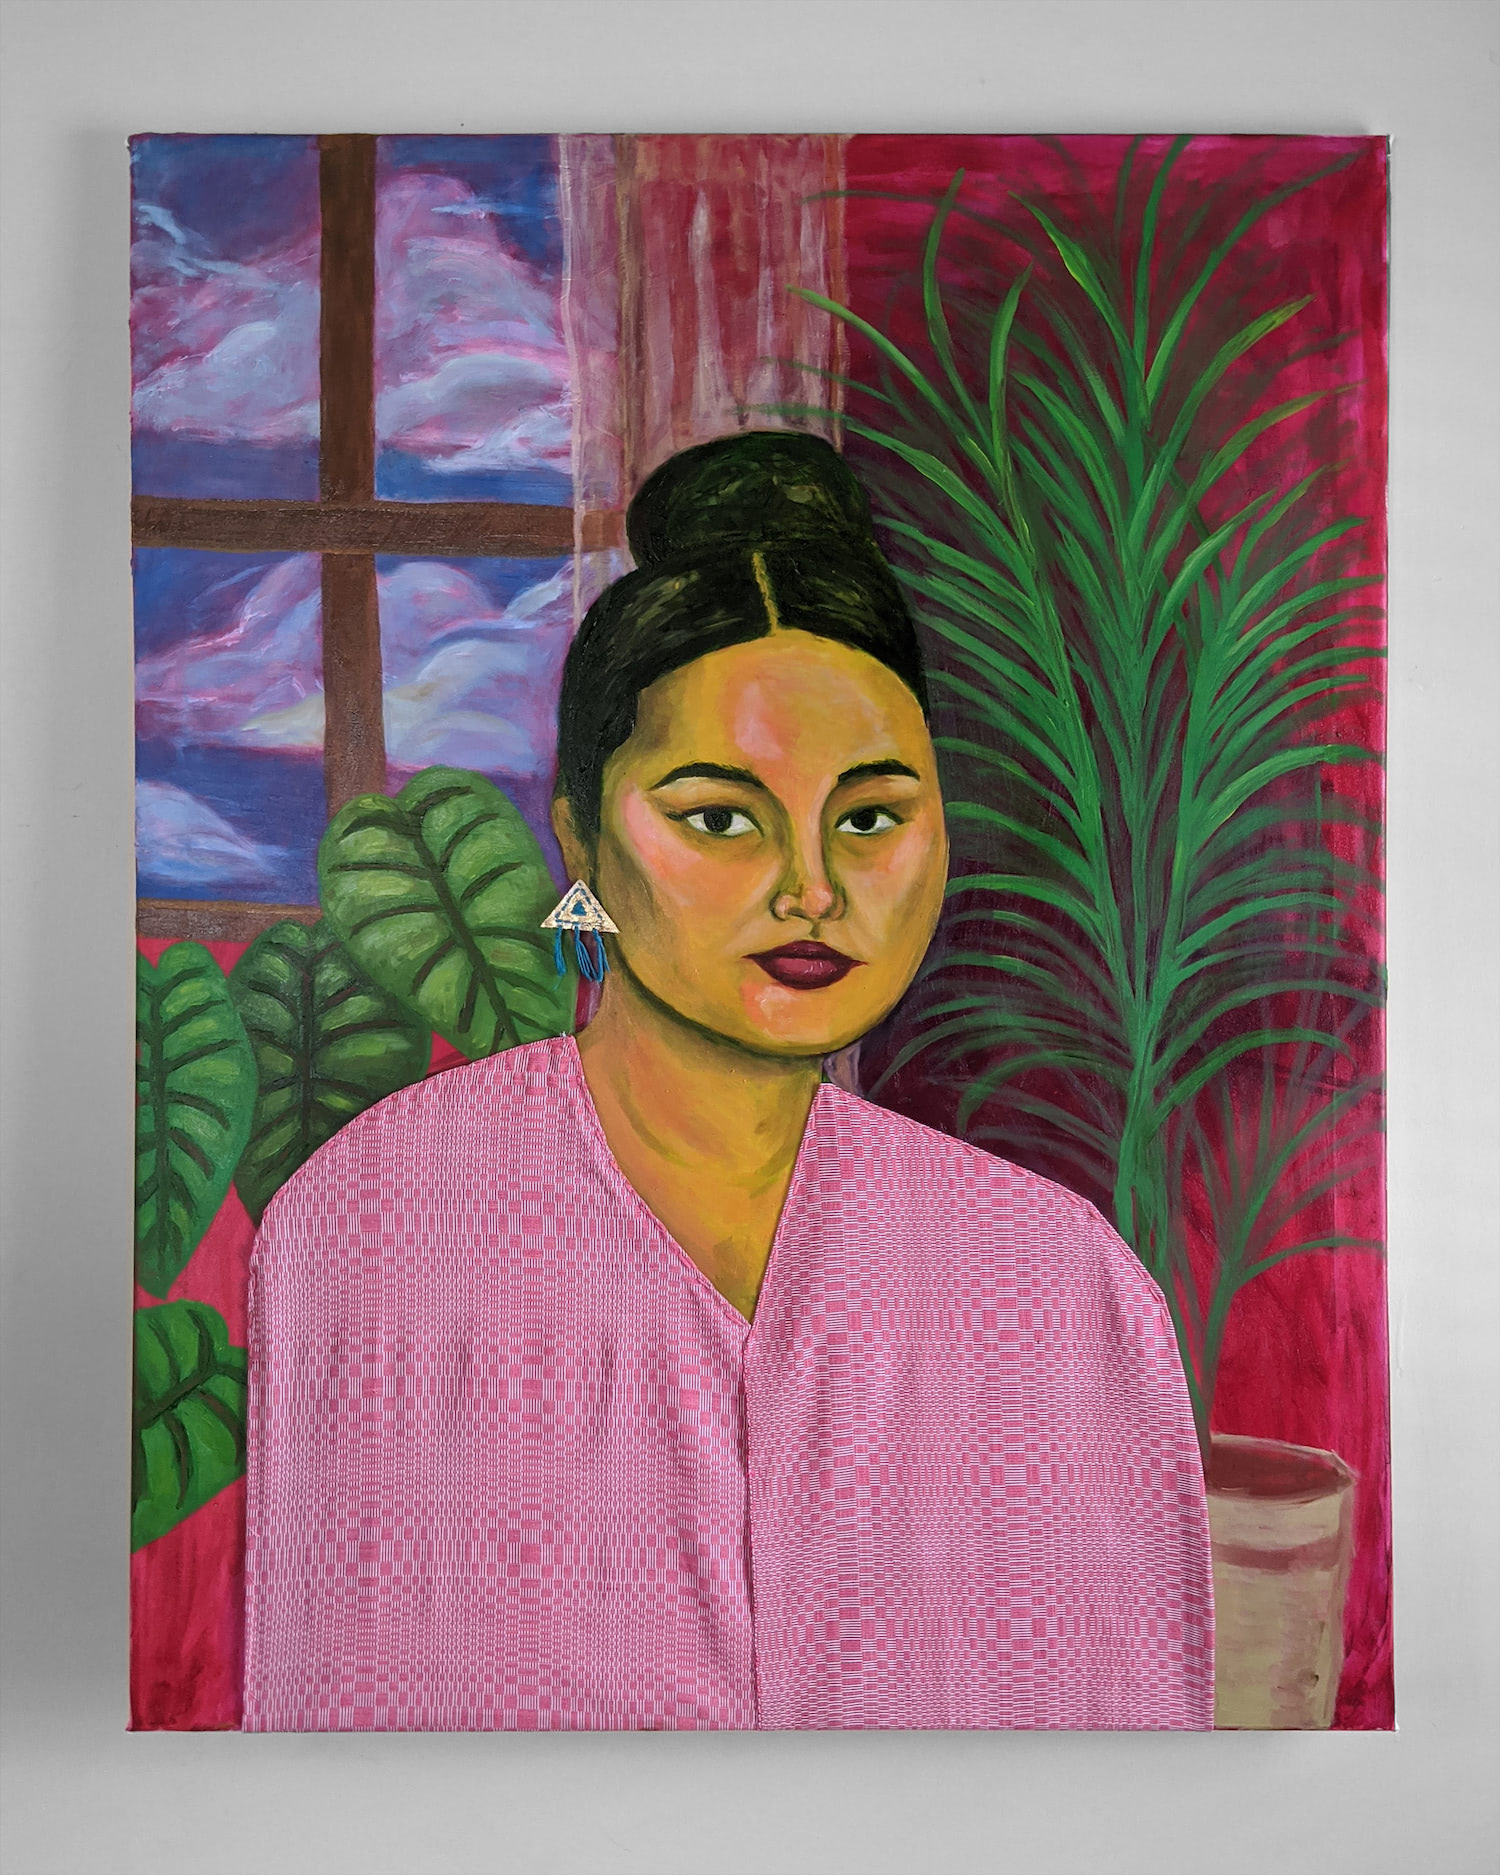 A painting of a woman wearing a pink dress. The dress is cloth attached to the canvas. There is a window behind her and plants in the background. The woman is painted yellow. She is looking directly at the viewer, intensely.